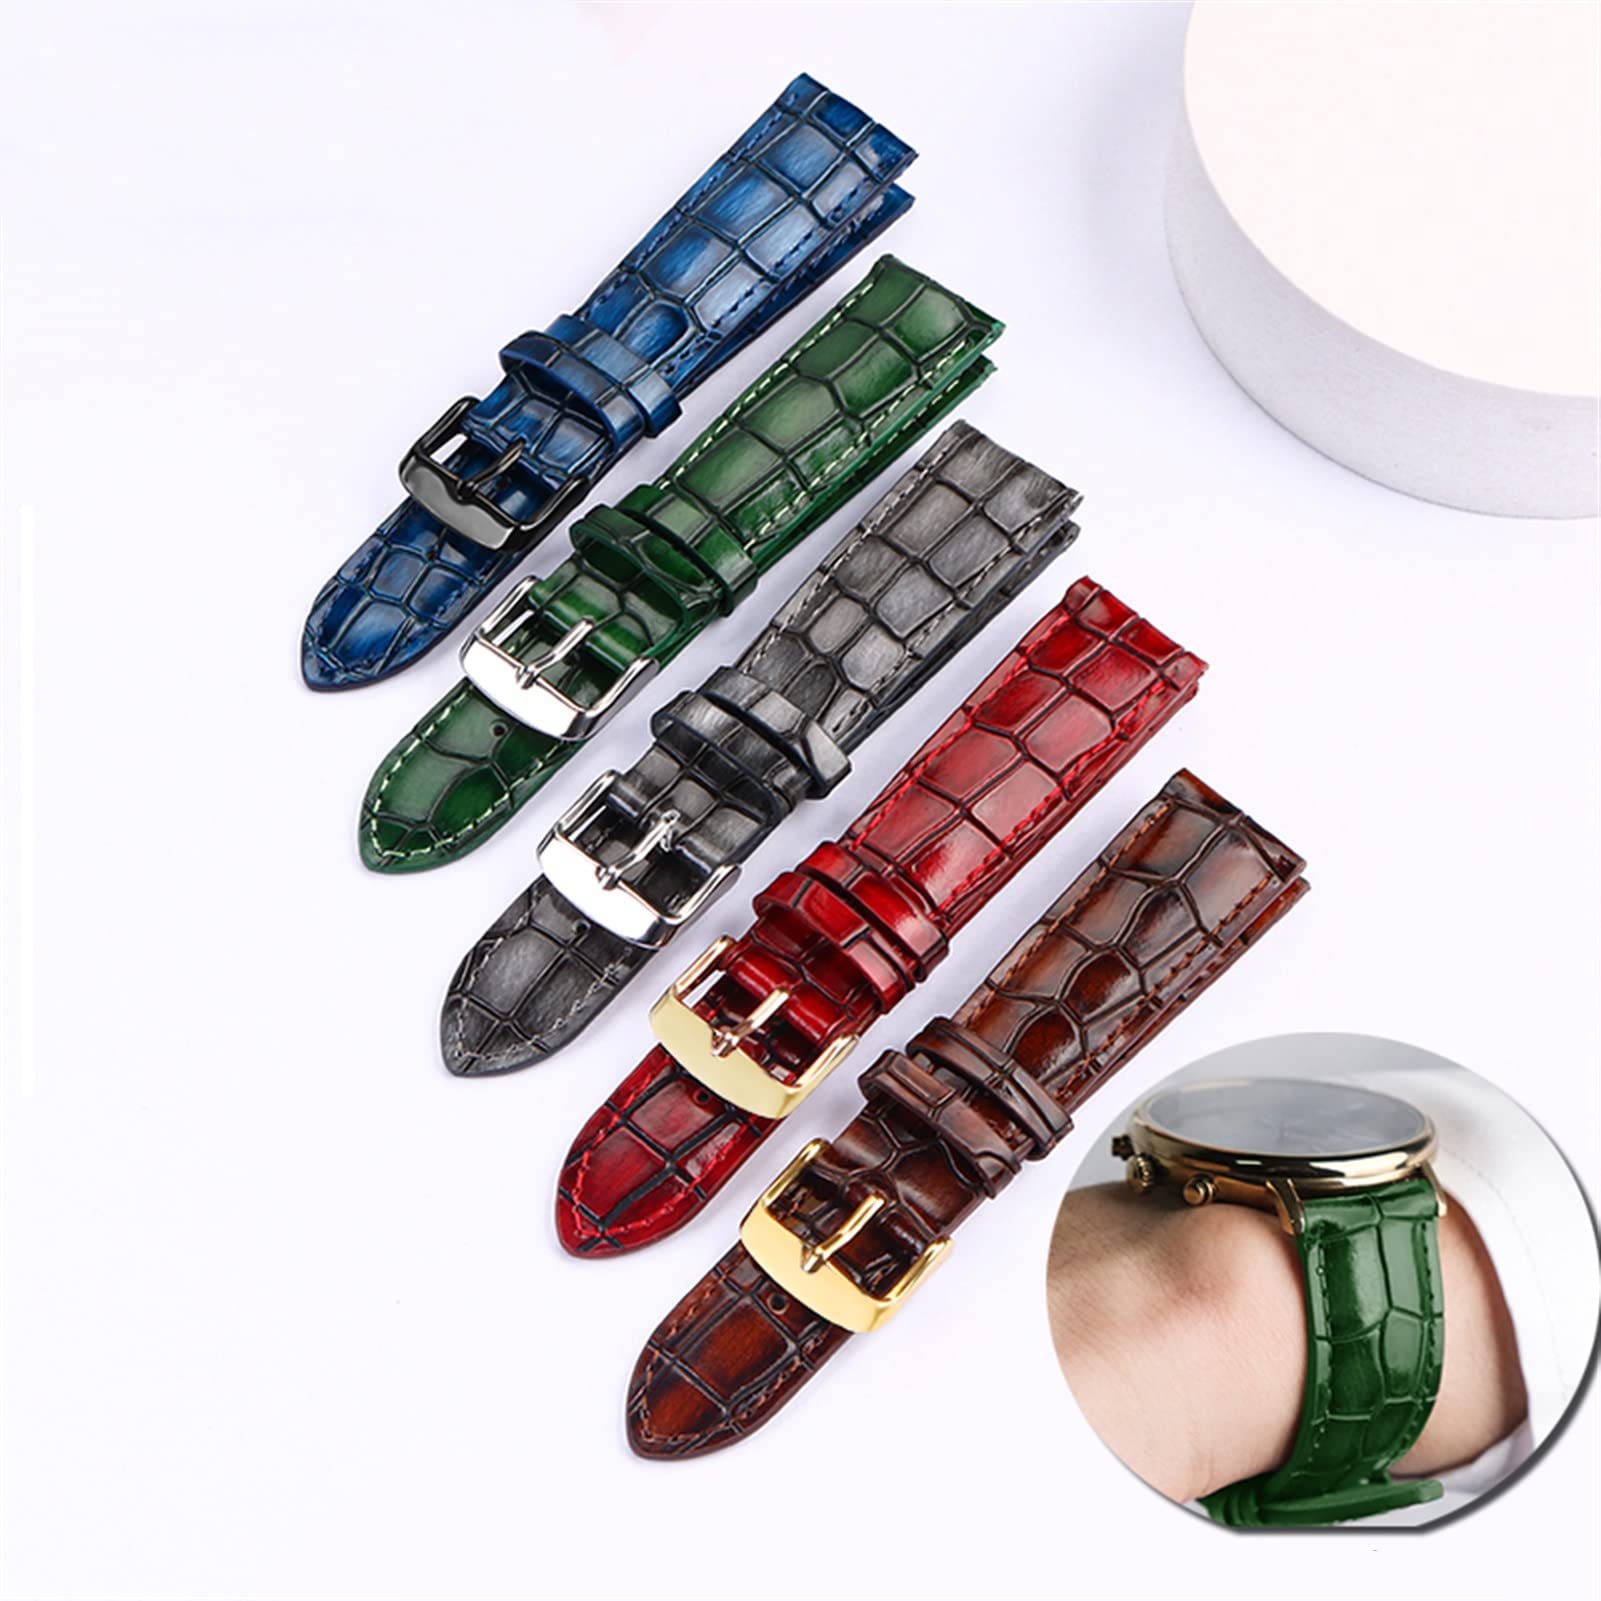 Wscebck Crocodile Texture Calfskin Leather Watch Strap18mm 20mm 22mm Watchband for Men Women Watch Band Solid Buckle (Color : Green Silver, Size : 18mm)